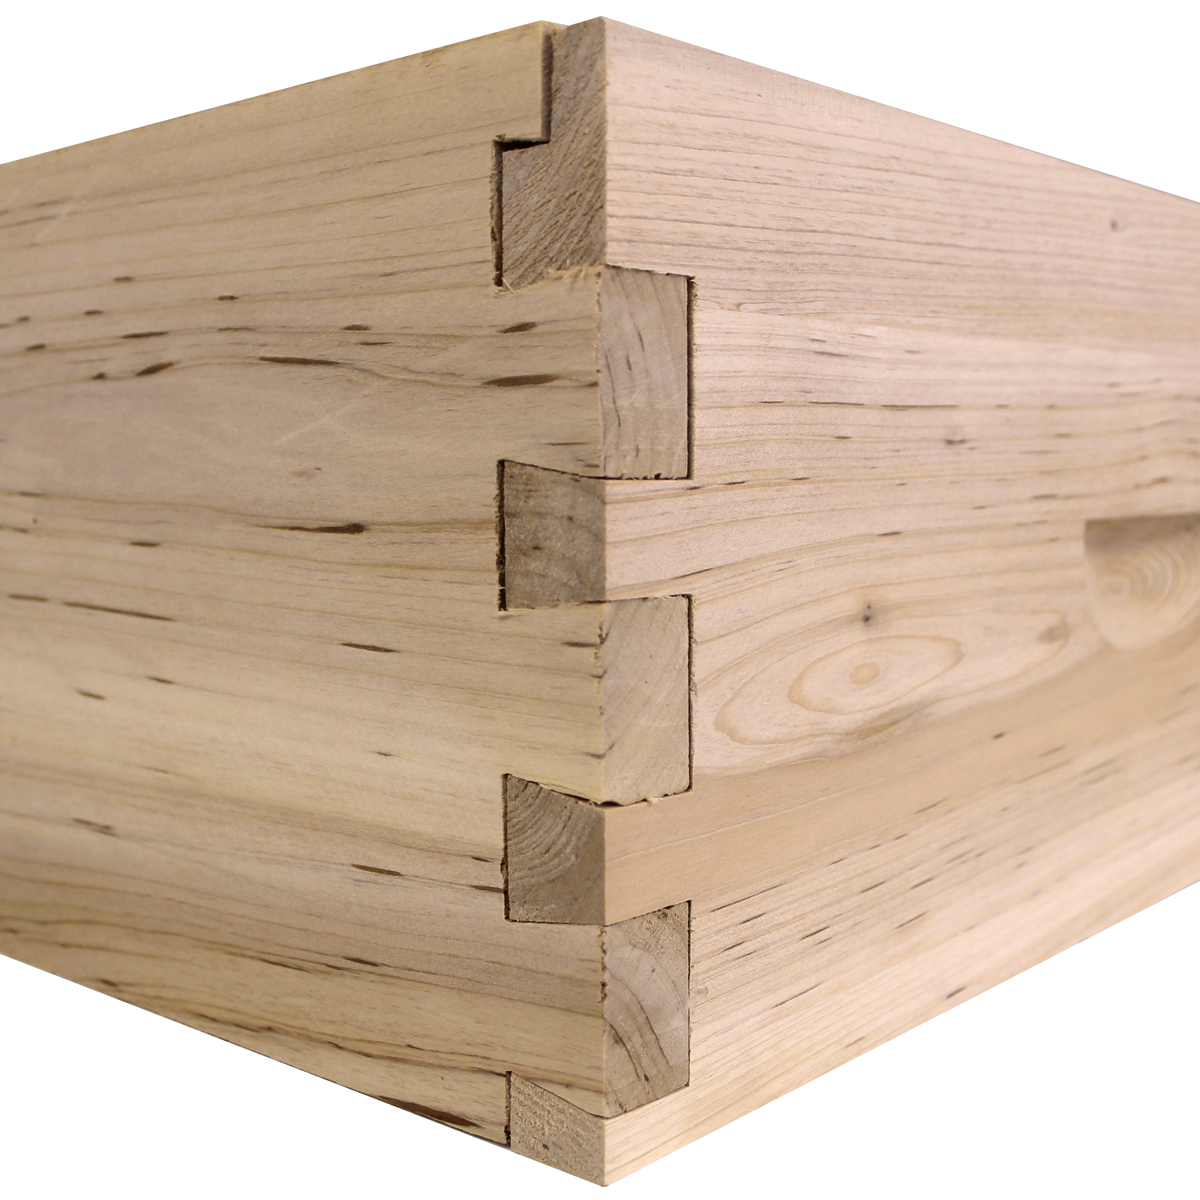 NuBee 10 Frame Medium Bee Box Uses Dovetail Joints